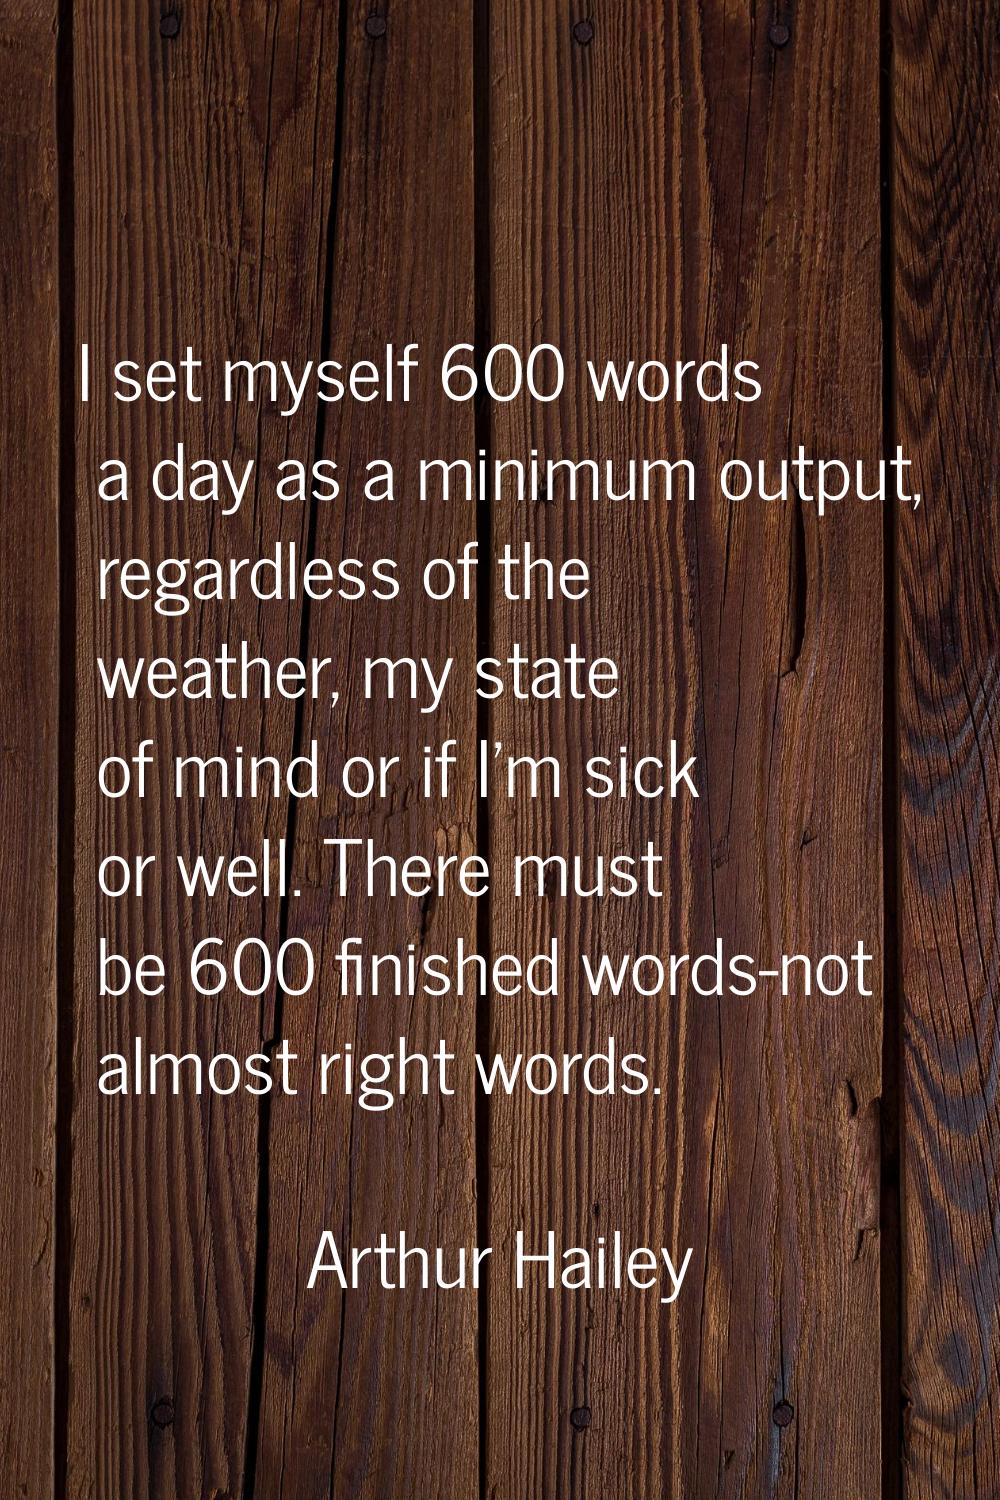 I set myself 600 words a day as a minimum output, regardless of the weather, my state of mind or if